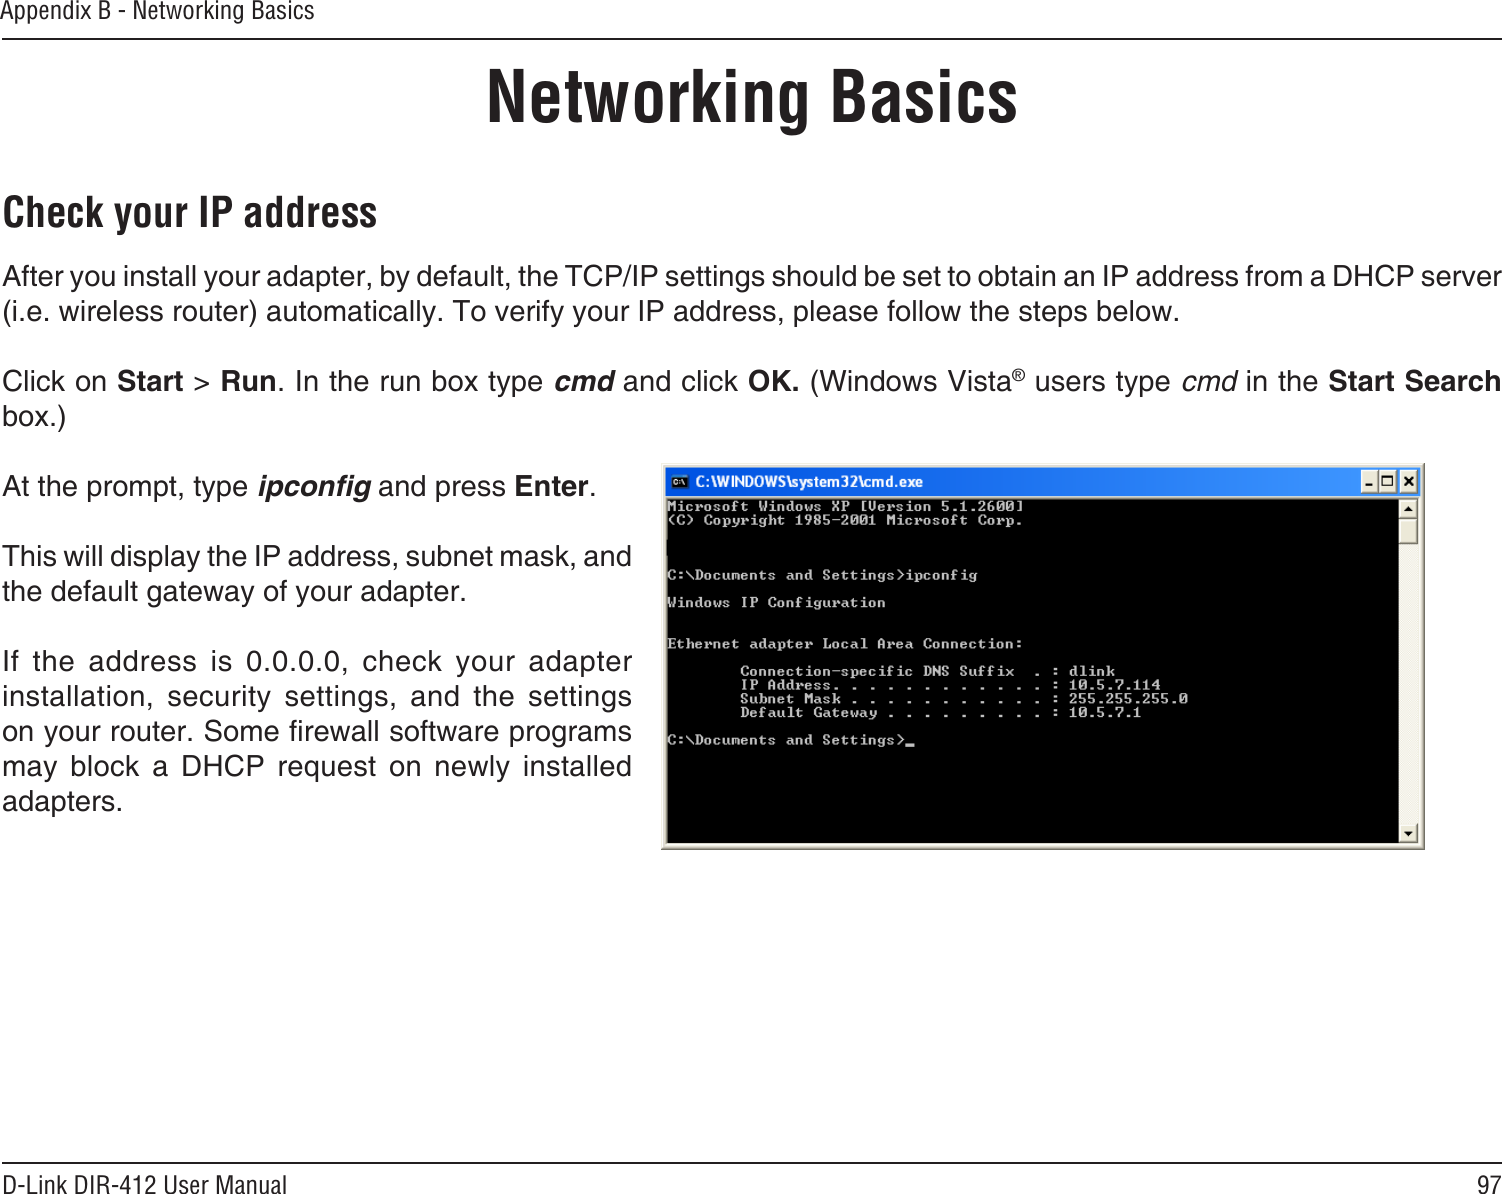 97D-Link DIR-412 User ManualAppendix B - Networking BasicsNetworking BasicsCheck your IP addressAfter you install your adapter, by default, the TCP/IP settings should be set to obtain an IP address from a DHCP server (i.e. wireless router) automatically. To verify your IP address, please follow the steps below.Click on Start &gt; Run. In the run box type cmd and click OK. (Windows Vista® users type cmd in the Start Search box.)At the prompt, type ipconﬁg and press Enter.This will display the IP address, subnet mask, and the default gateway of your adapter.If  the  address  is  0.0.0.0,  check  your  adapter installation,  security  settings,  and  the  settings on your router. Some rewall software programs may  block  a  DHCP  request  on  newly  installed adapters. 